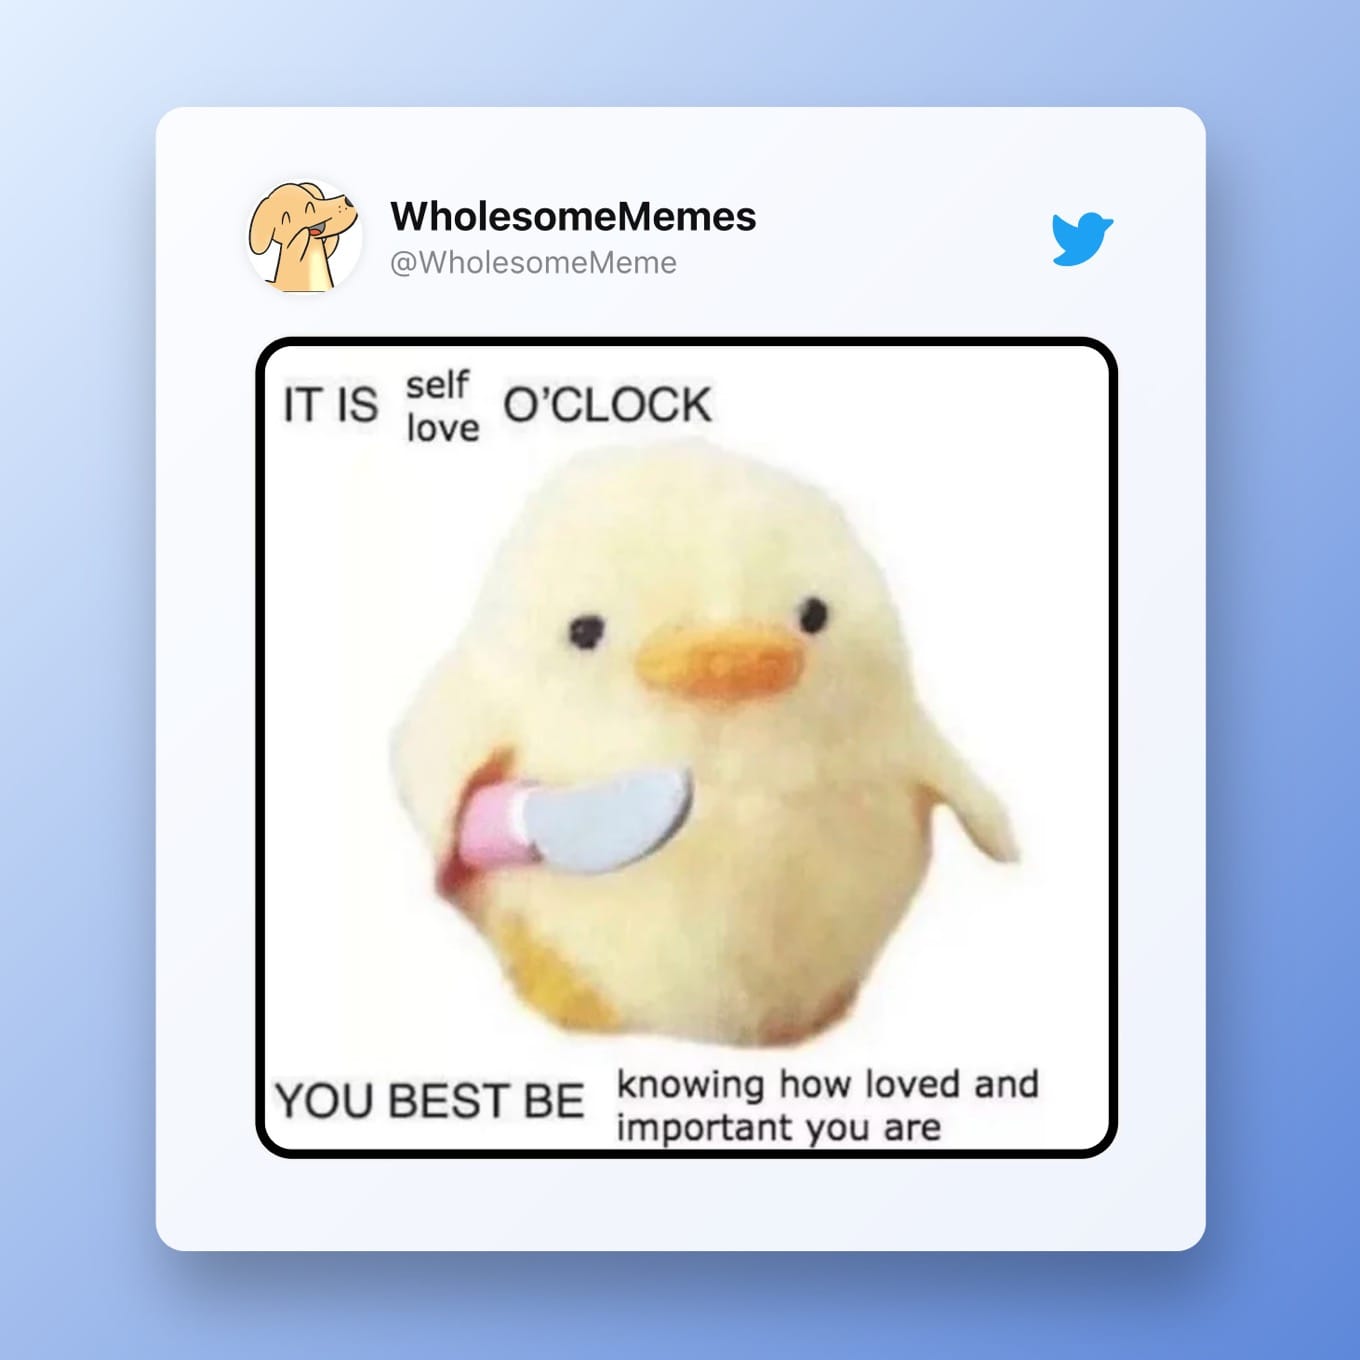 Wholesome Memes: It is self love o'clock